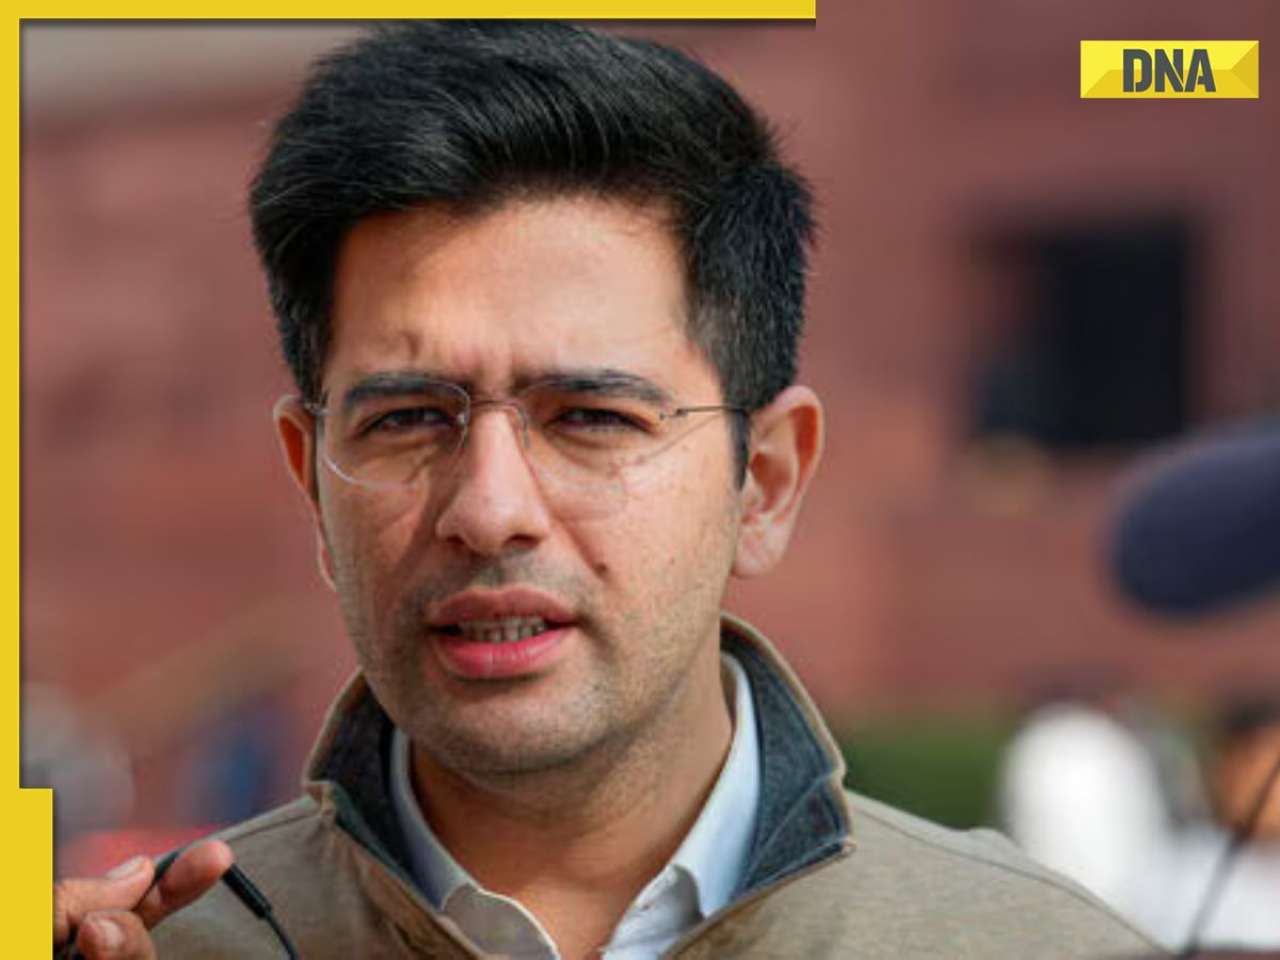 What Is Vitrectomy? Know all about the eye surgery AAP MP Raghav Chadha has undergone in London